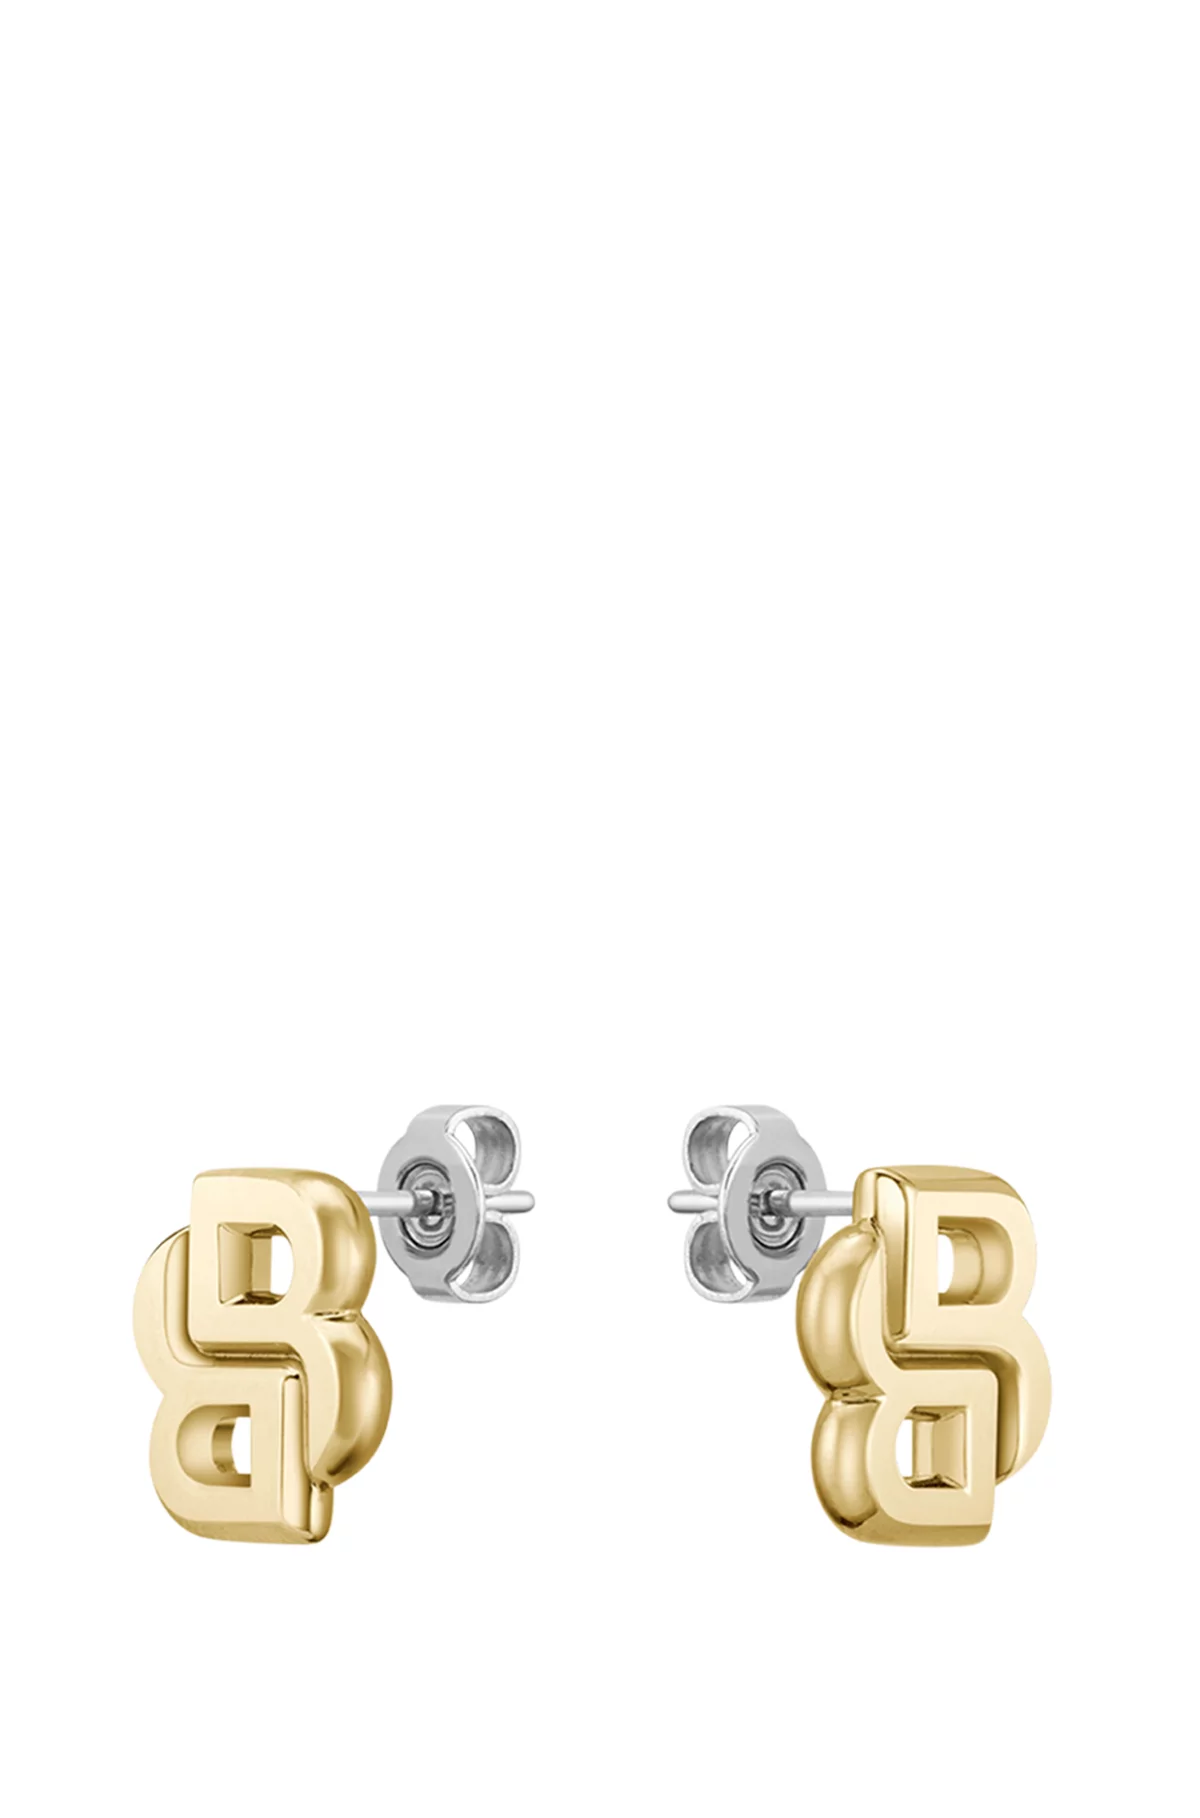 GOLD-TONE EARRINGS WITH DOUBLE B MONOGRAM